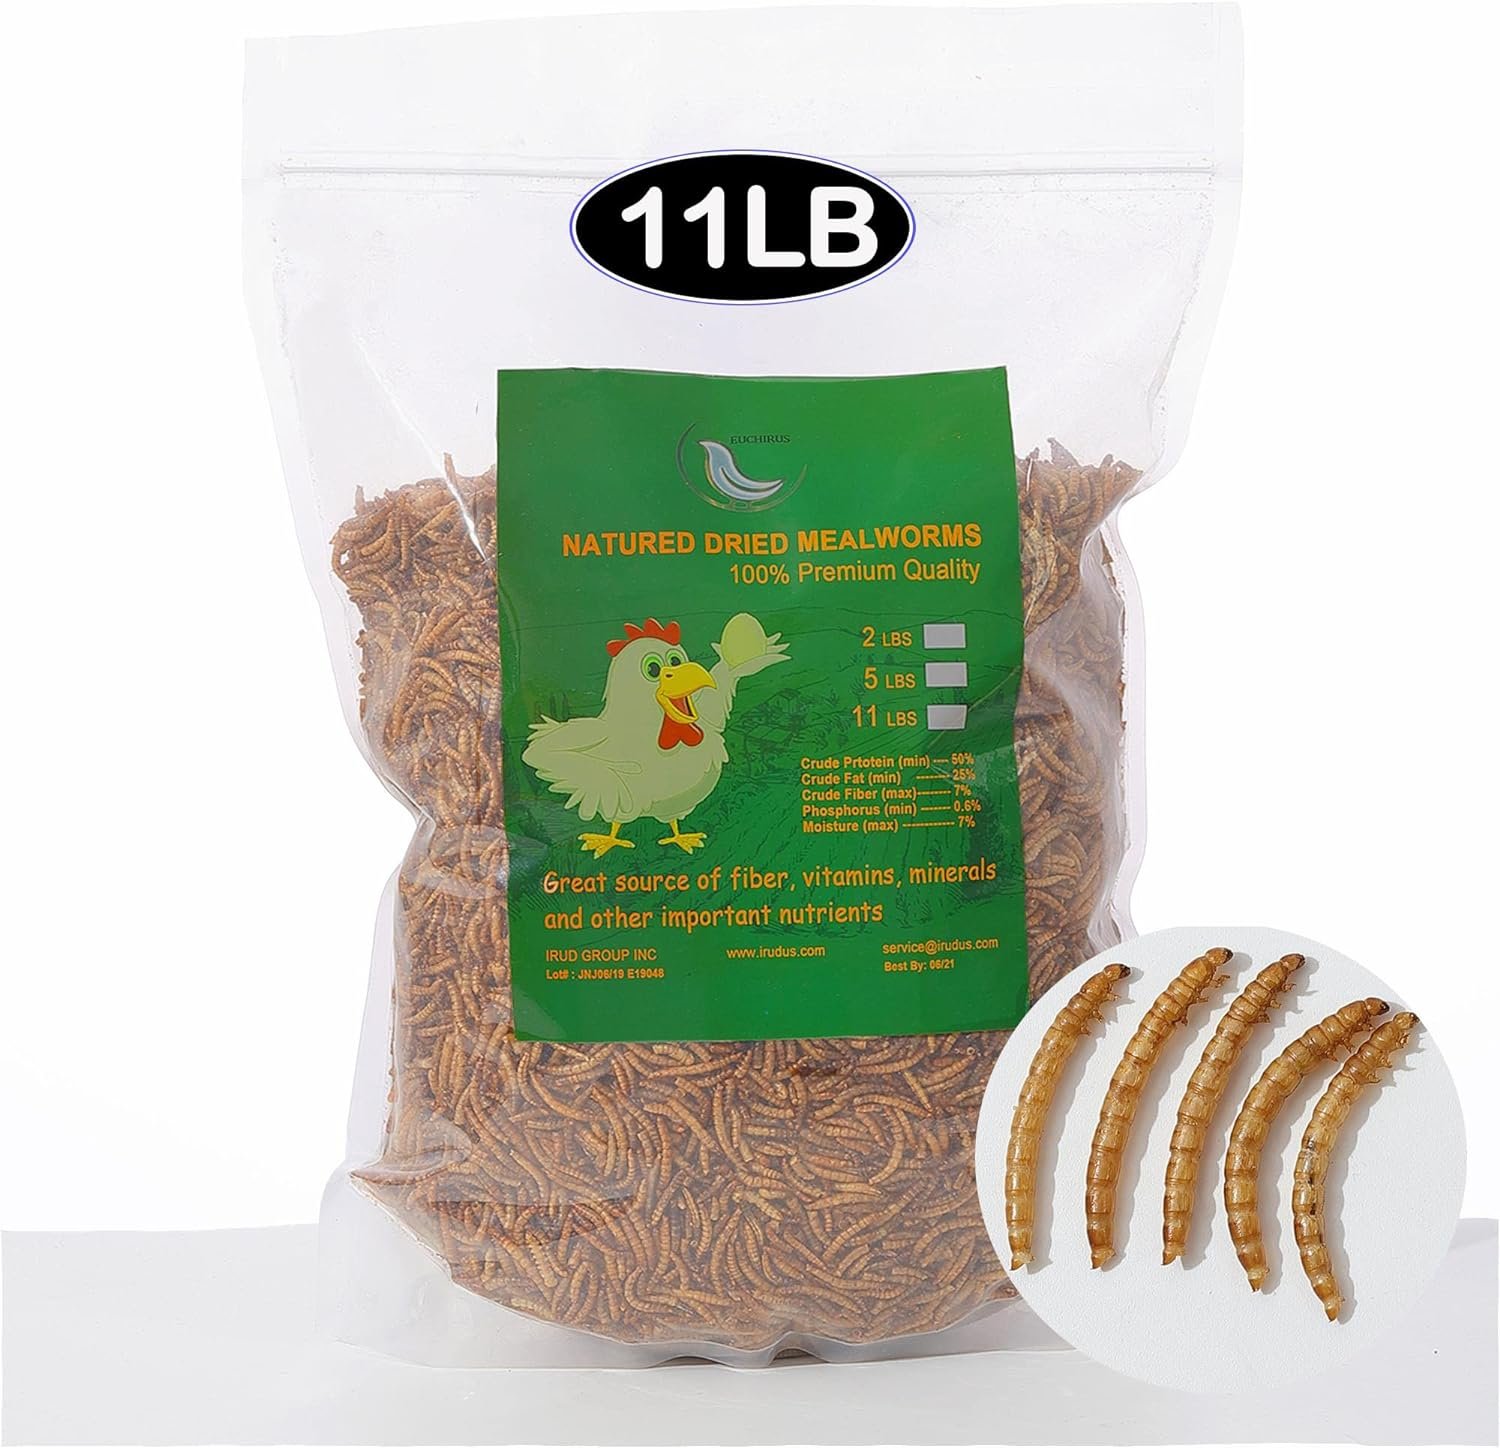 11 lbs Non-GMO Dried Mealworms for Wild Bird Chicken Fish,High-Protein,Large Meal Worms.